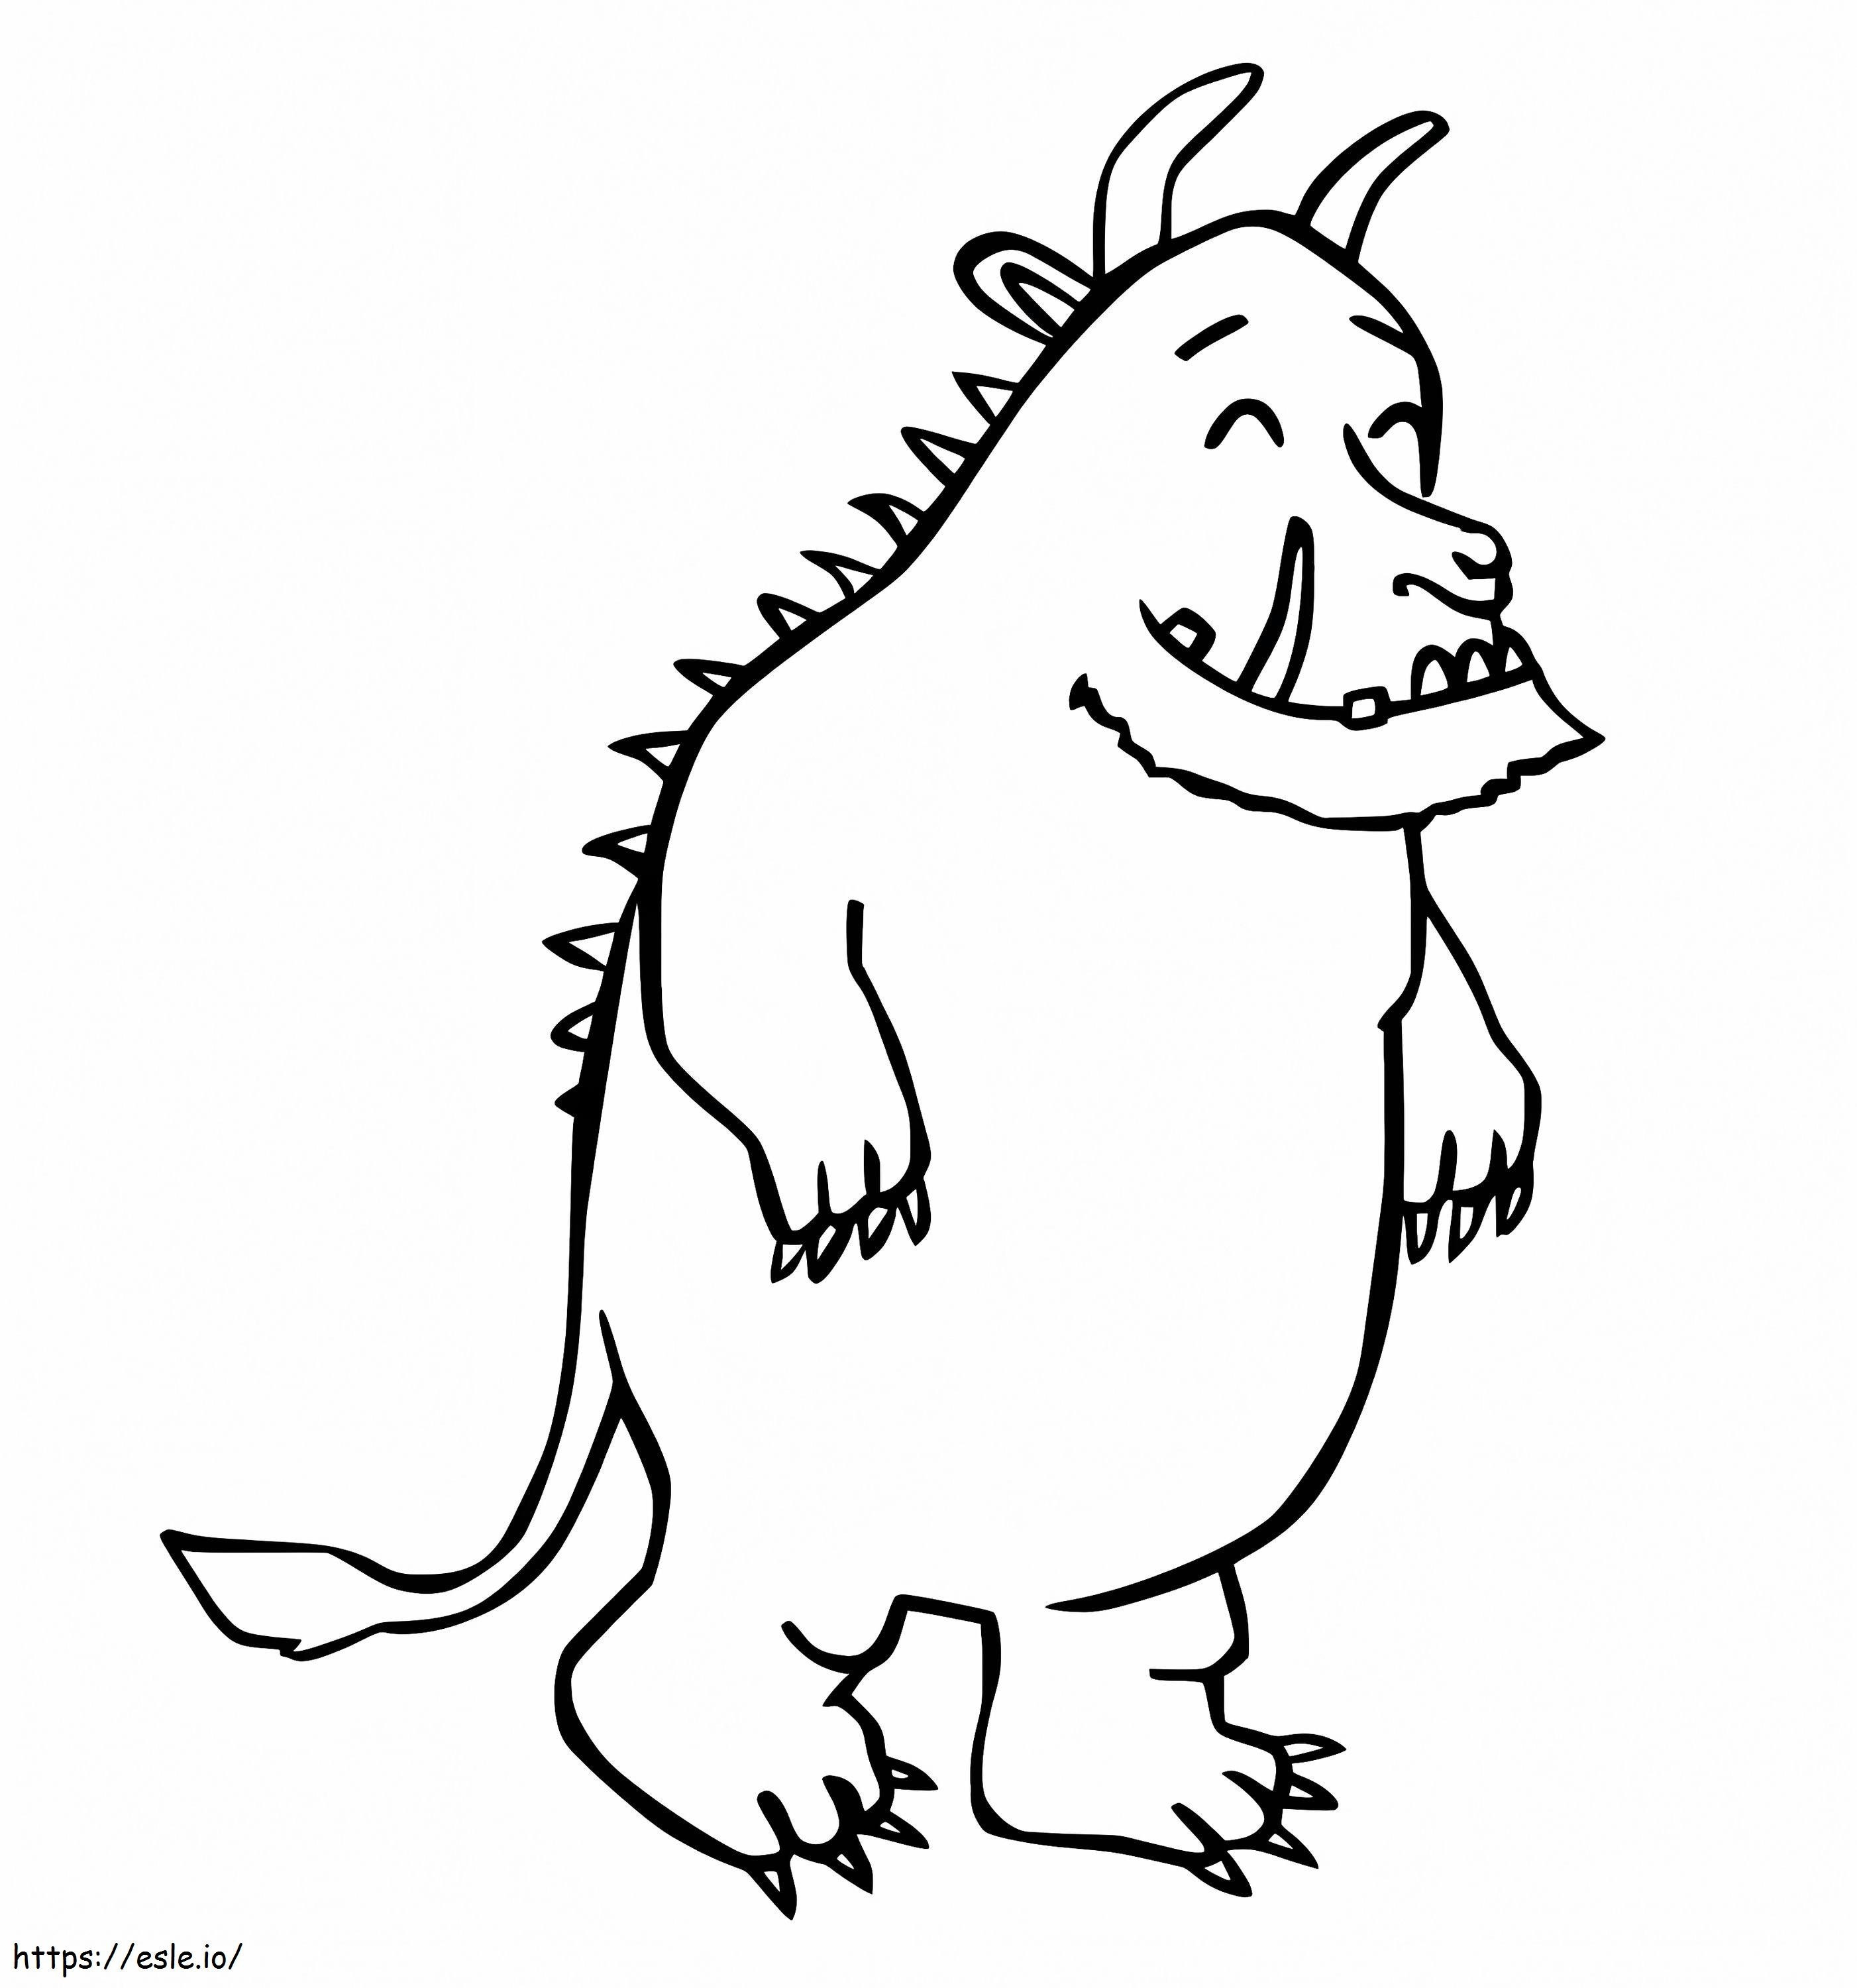 Happy Gruffalo coloring page